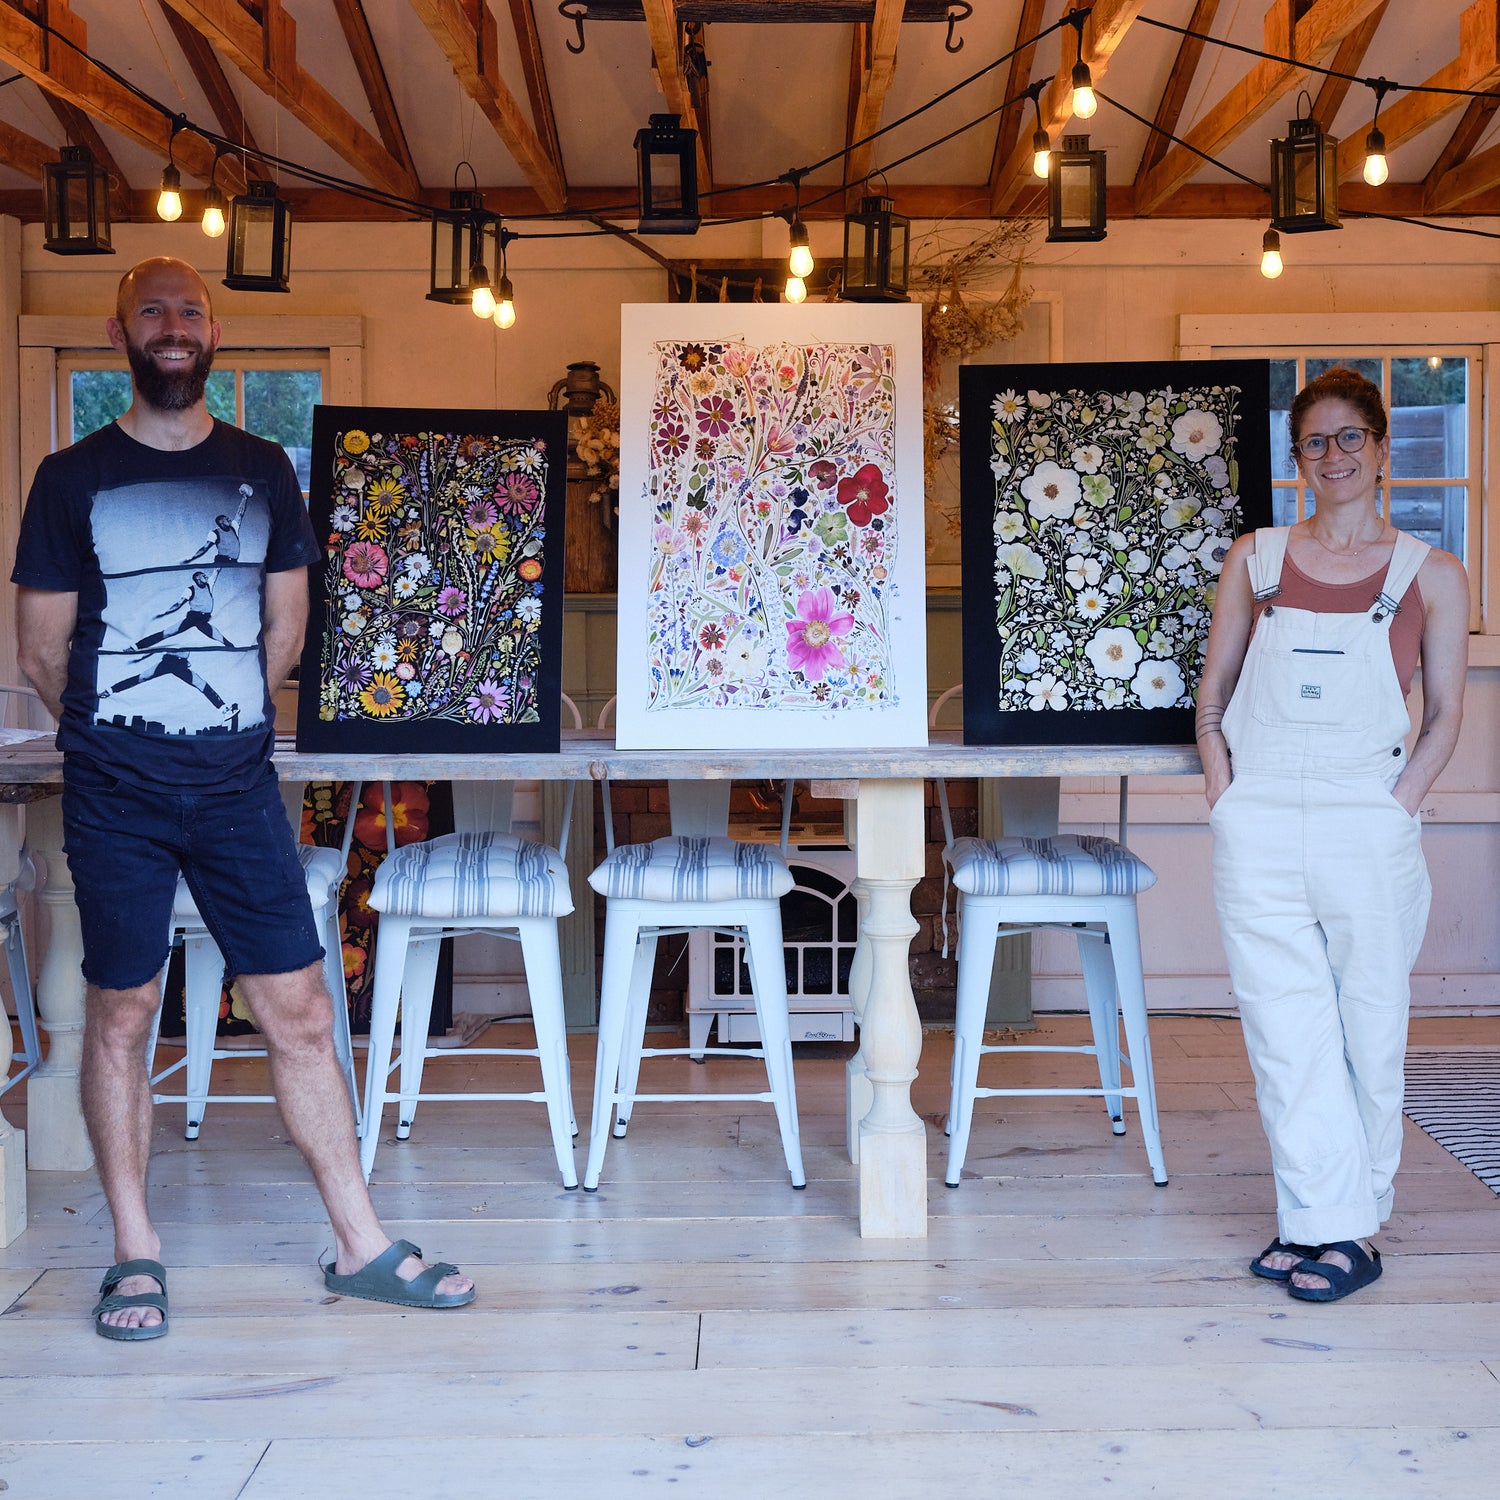 A man and a woman standing in a barn with three pieces of pressed flower art.